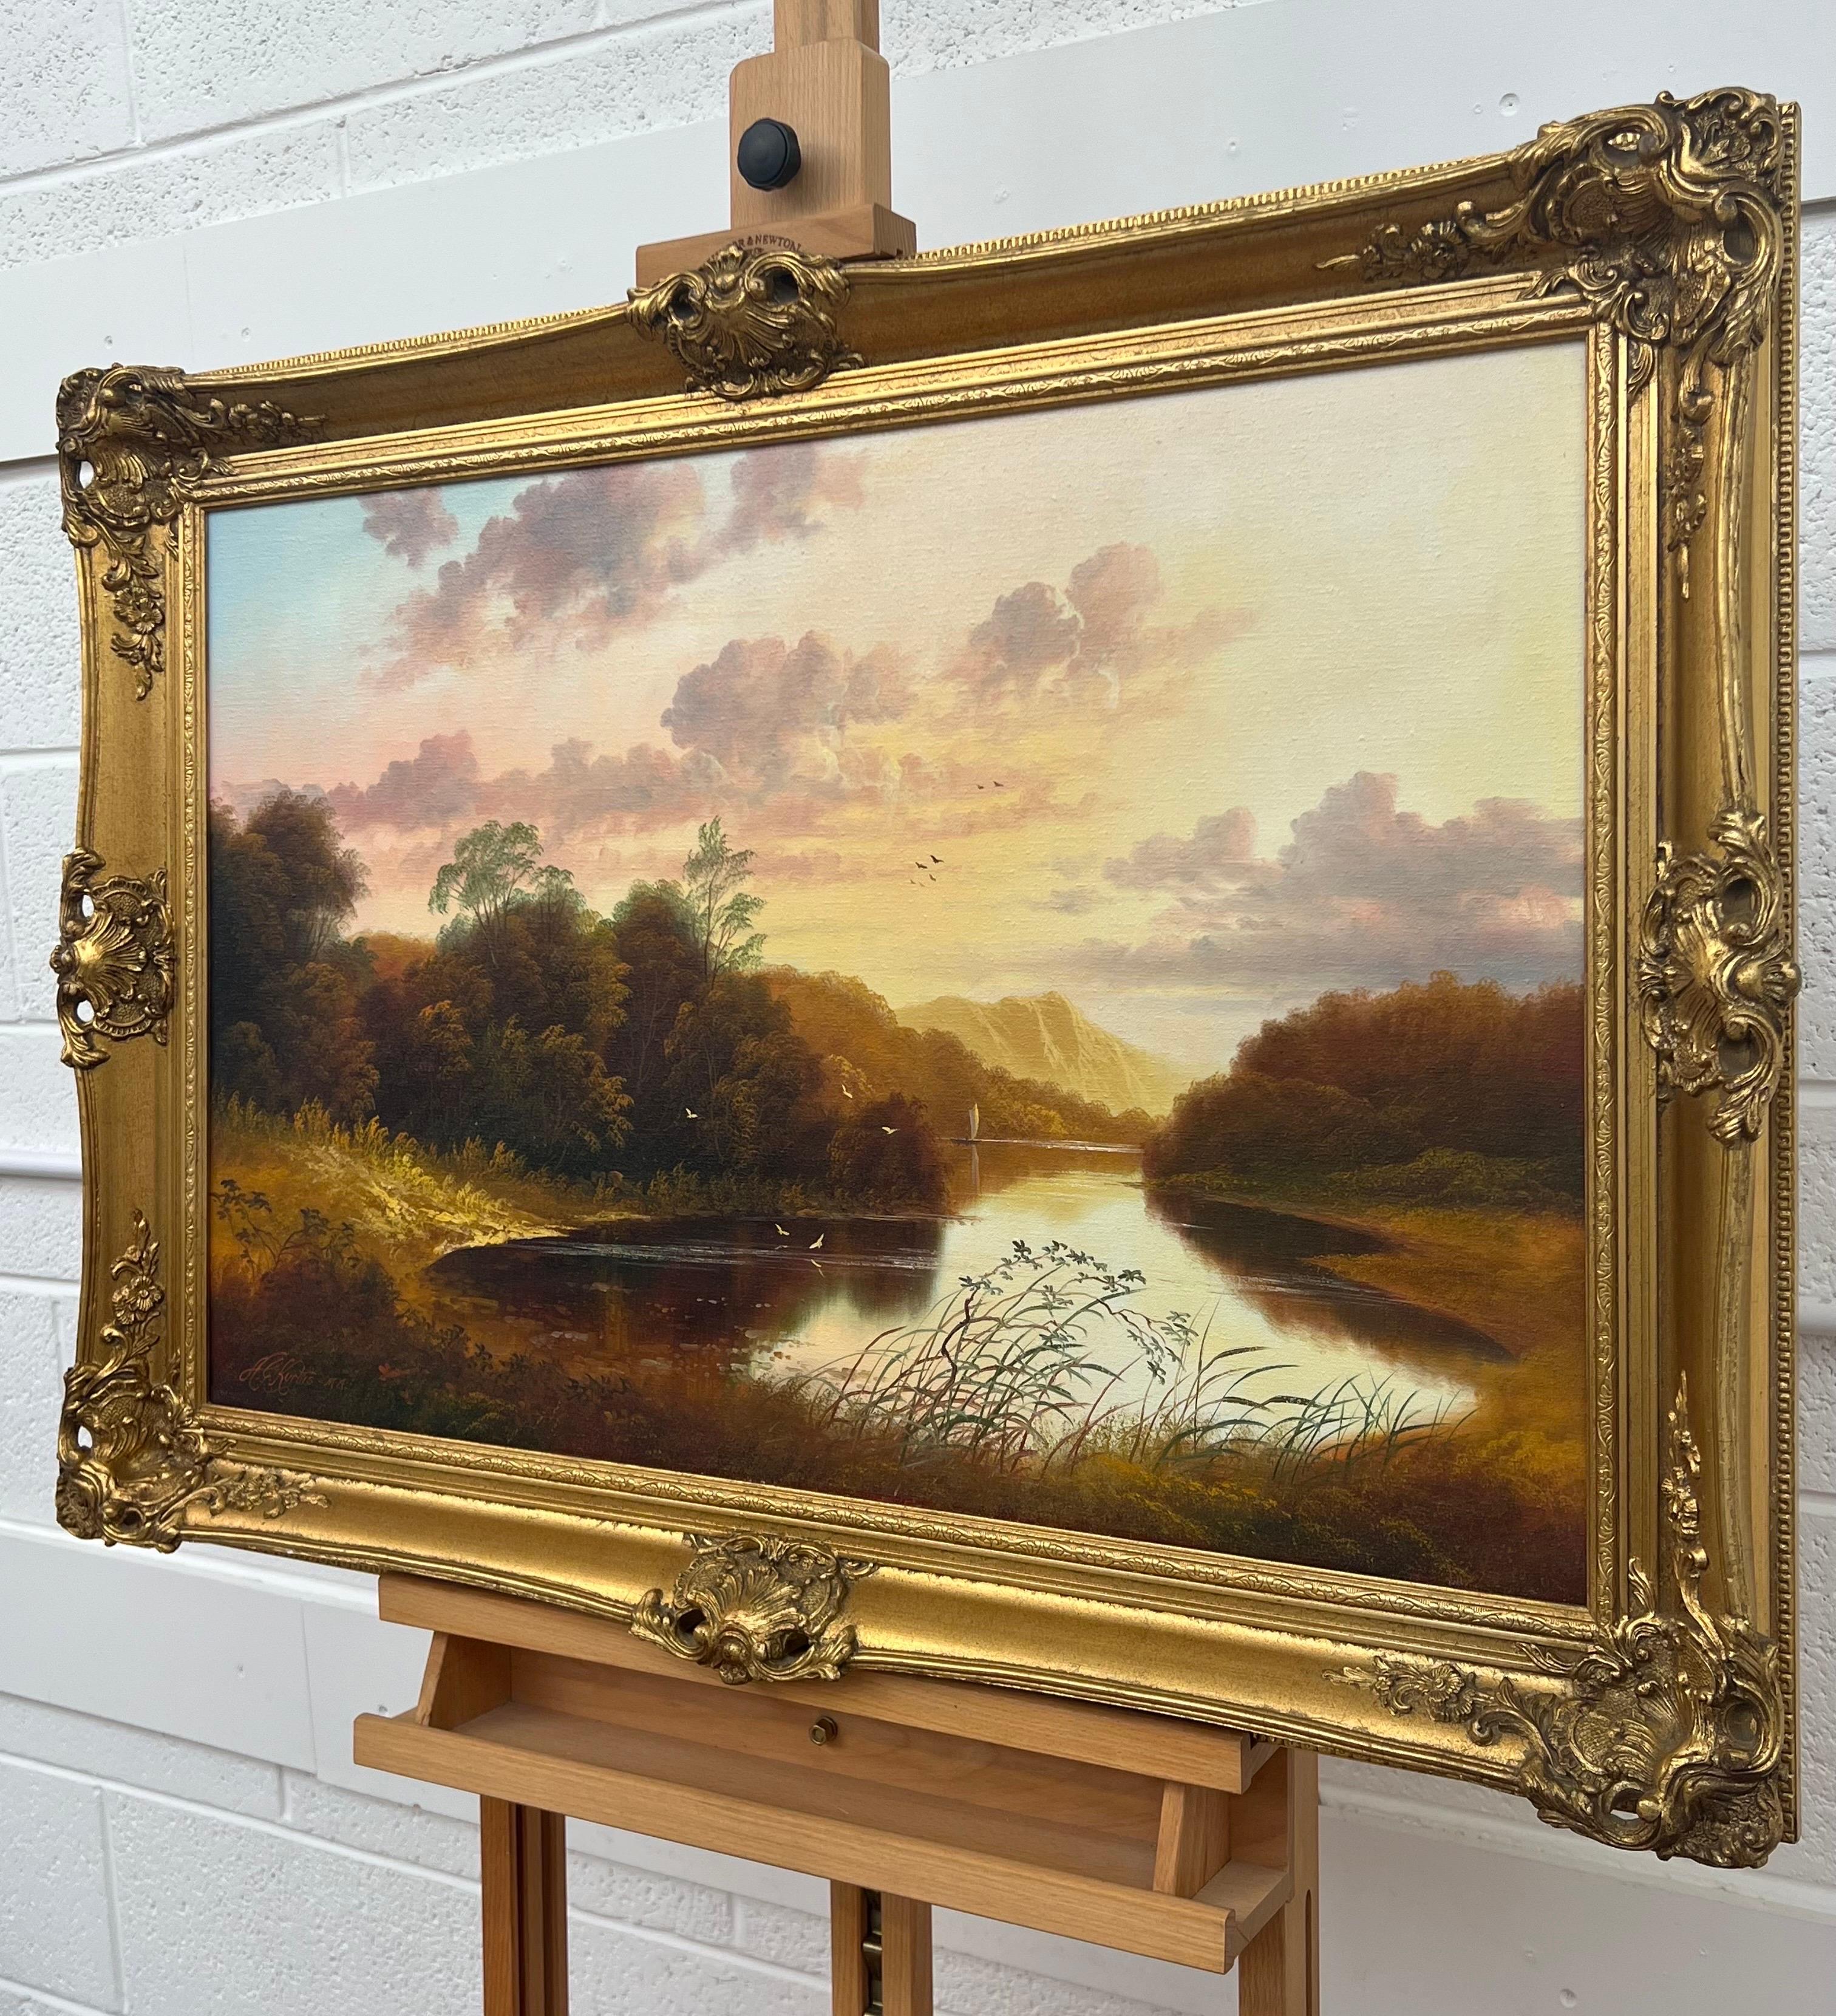 Warm Autumnal Mountain Lake Oil Painting of Scottish Highlands by British Artist, Andrew Grant Kurtis M.A.(Lon) B.Des.(Hons) L.S.I.A.D.

Art measures 30 x 20 inches 
Frame measures 36 x 26 inches 

As an artist of both classical and traditional